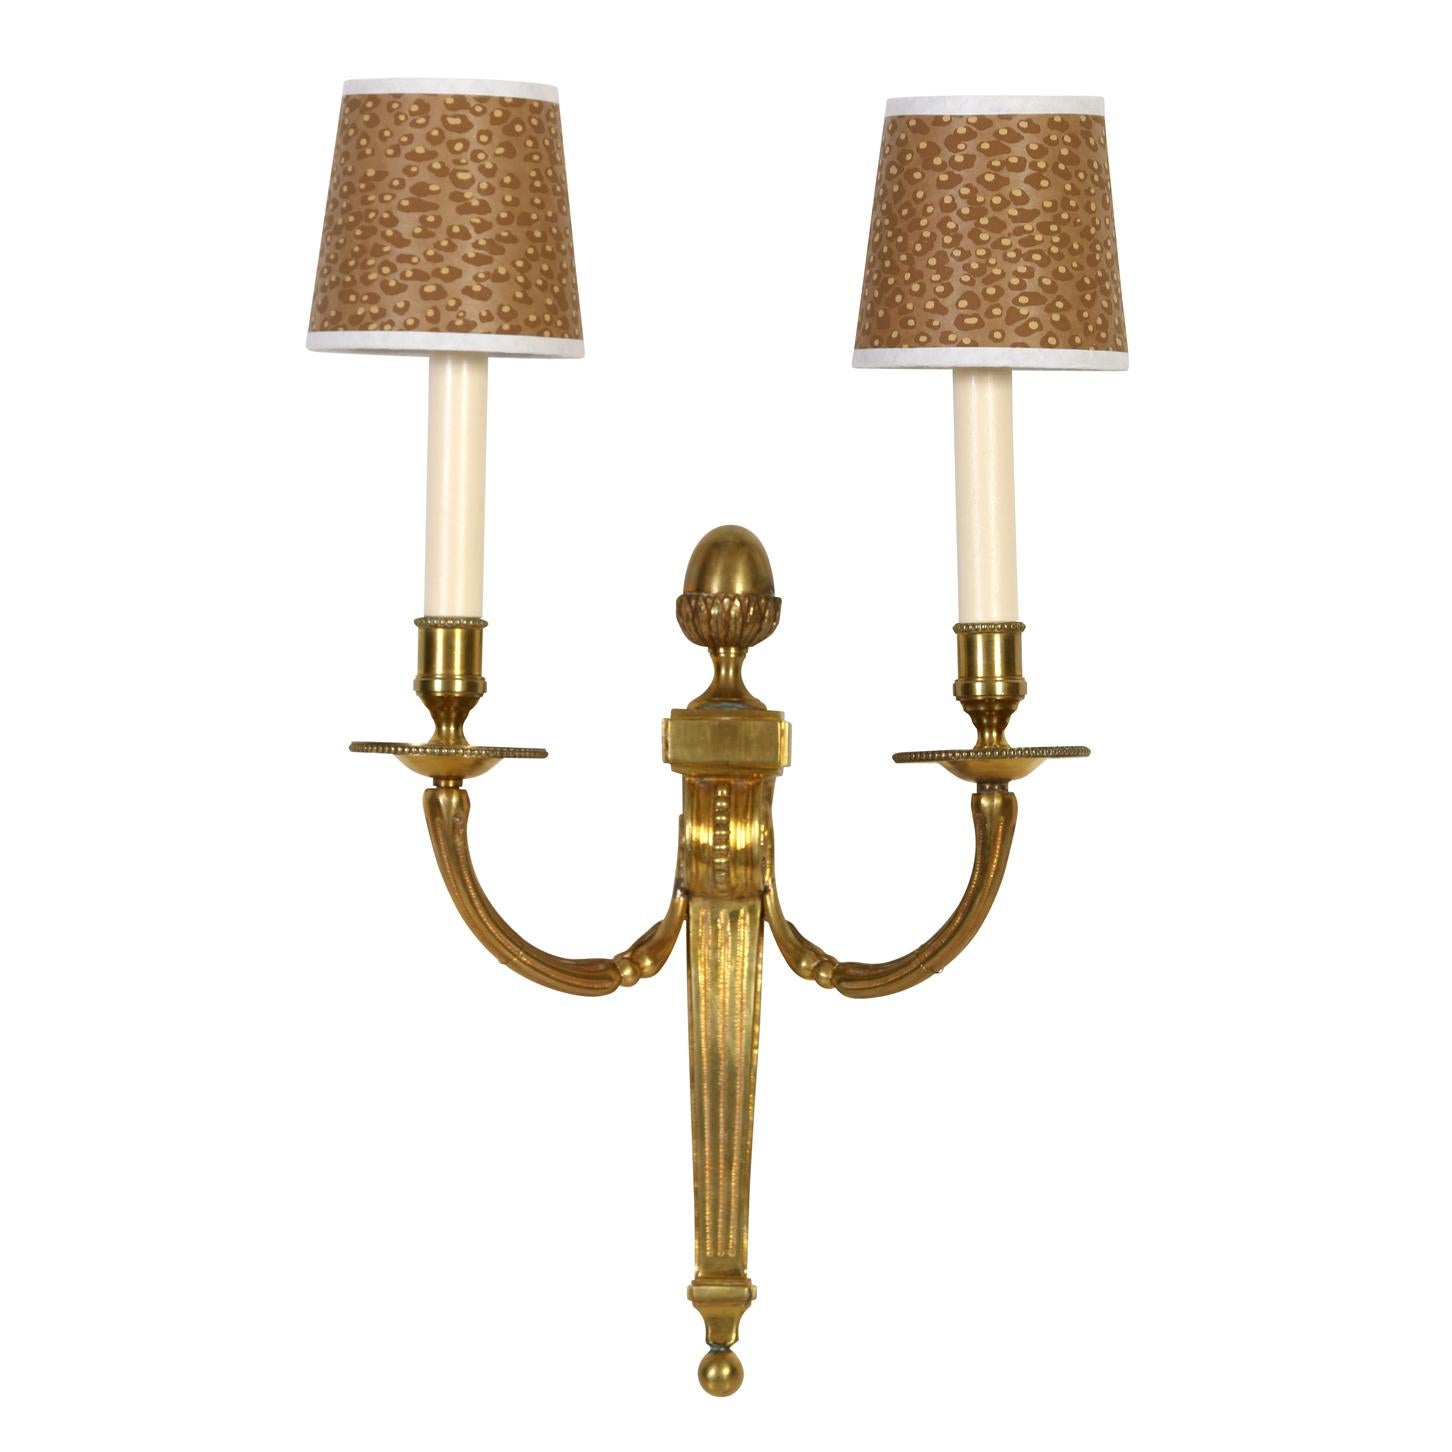 A set of four Louis XVI style gilt bronze, double arm sconces with tapered and reeded center stem and reeded curved arms. Bead detail completes the neoclassical look.  
